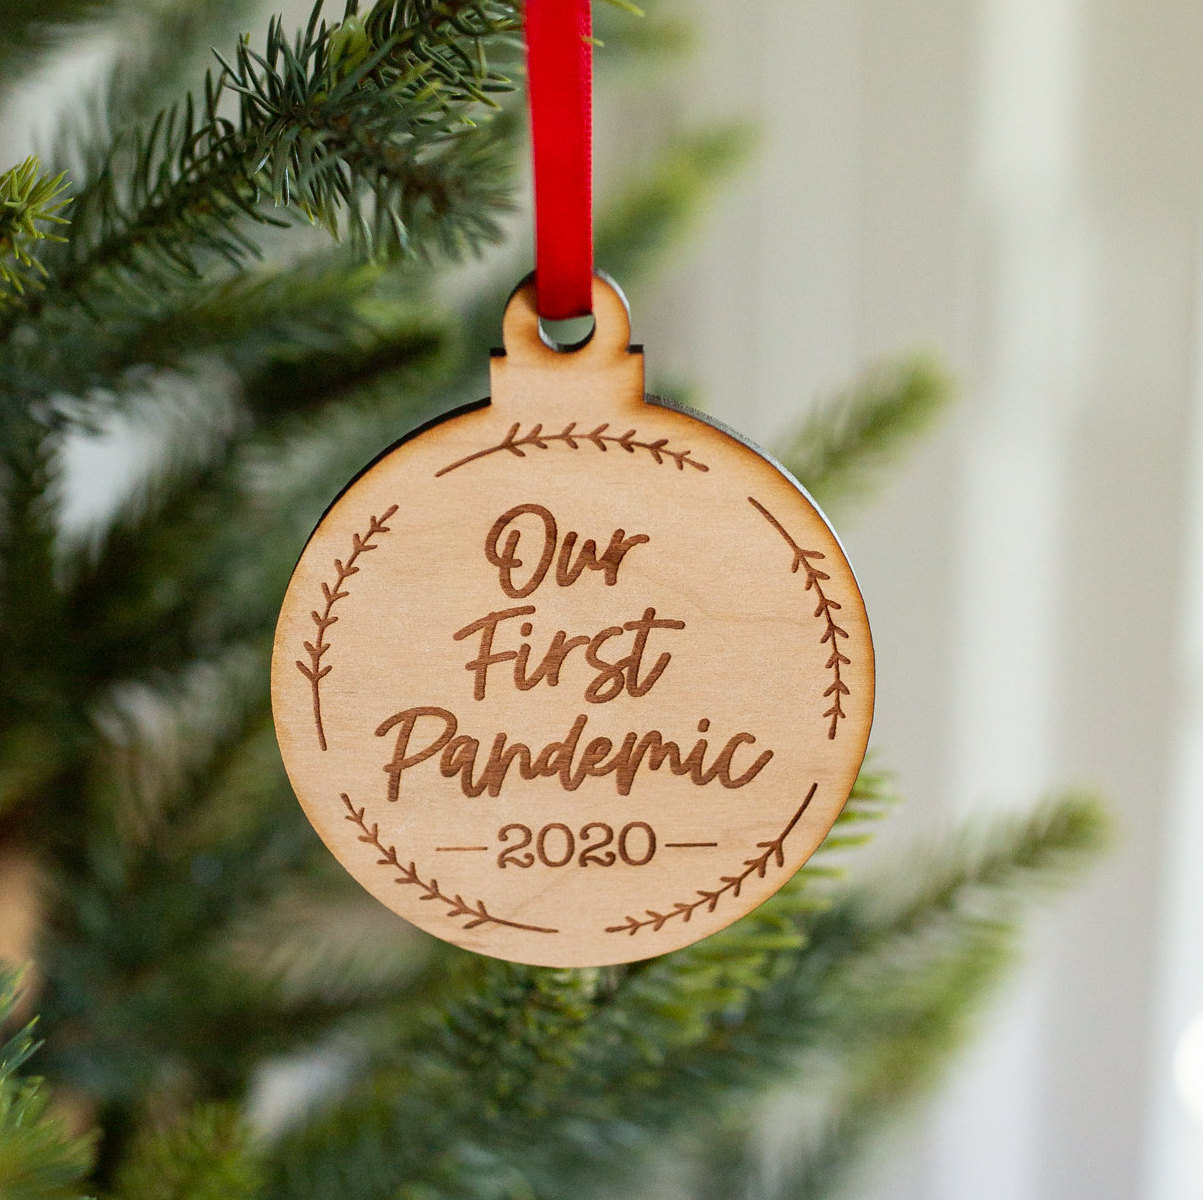 Our First Pandemic 2020 - Engraved Wooden Funny Christmas Ornament Charm,  Pandemic Christmas Gift,Funny Holiday Gift